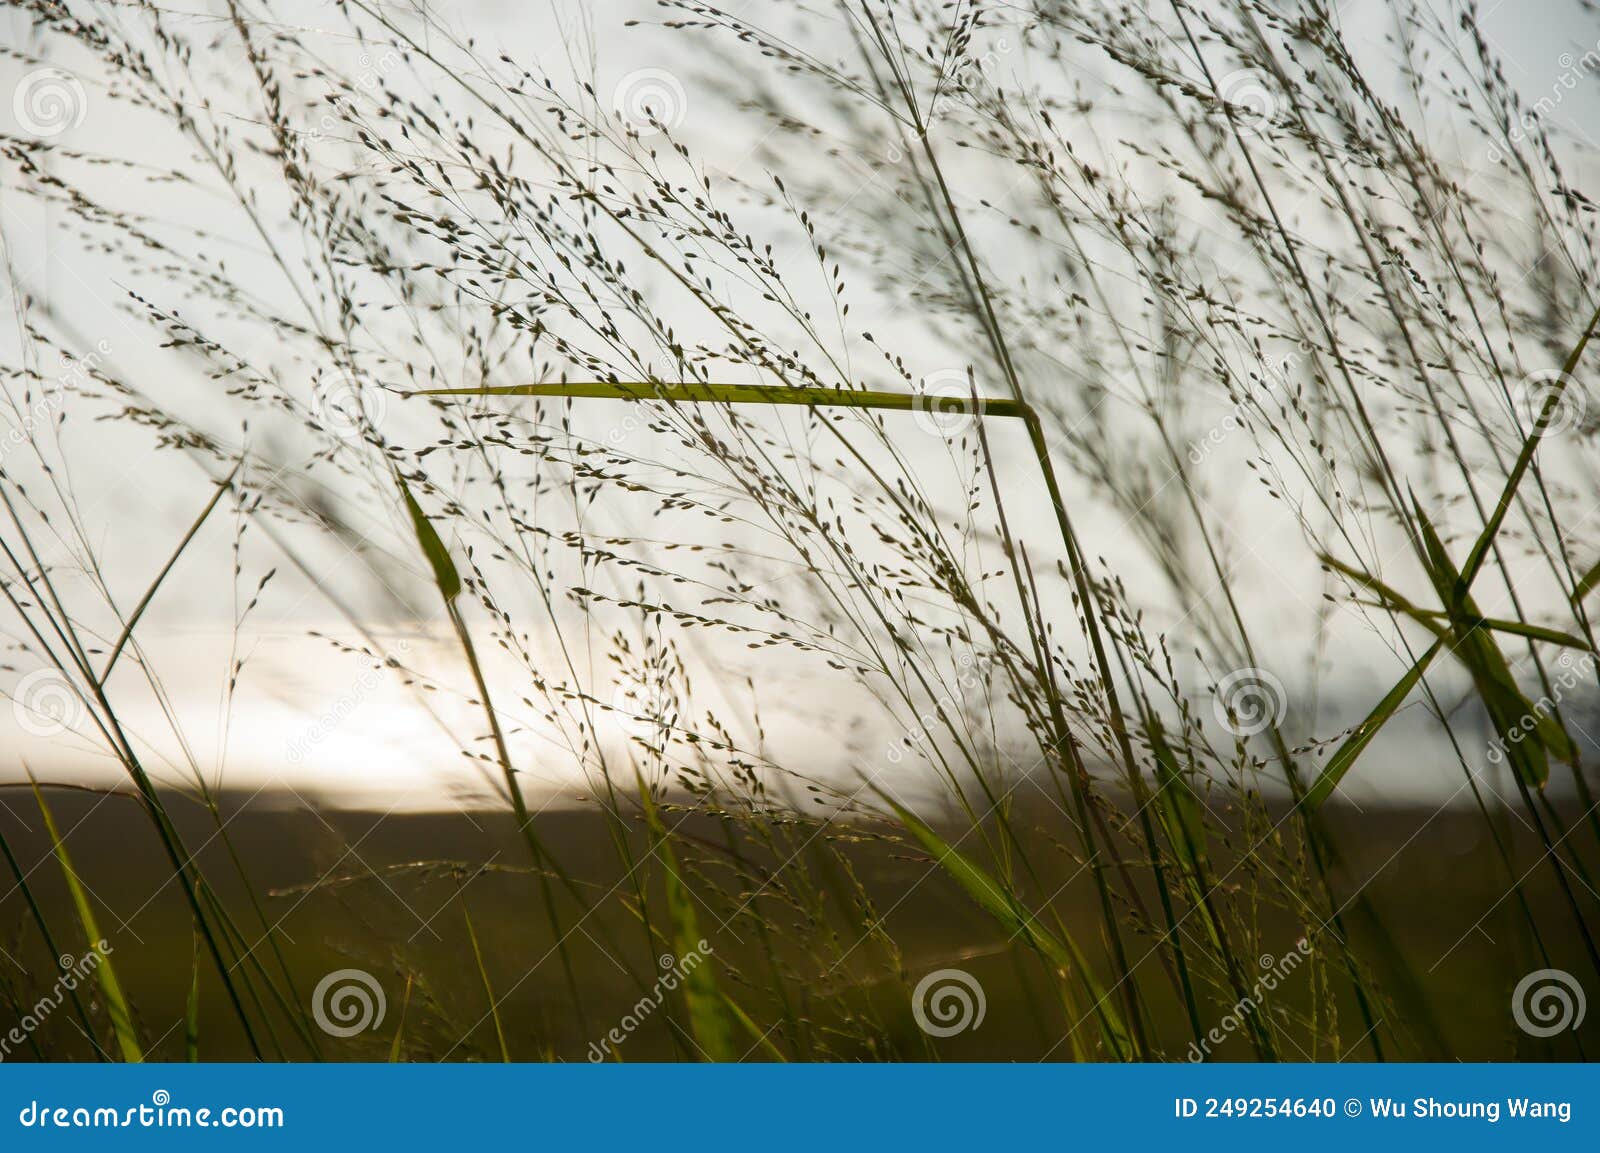 Sunset, Breeze, Reed Grass, Plants, Grass Stock Photo - Image of ...